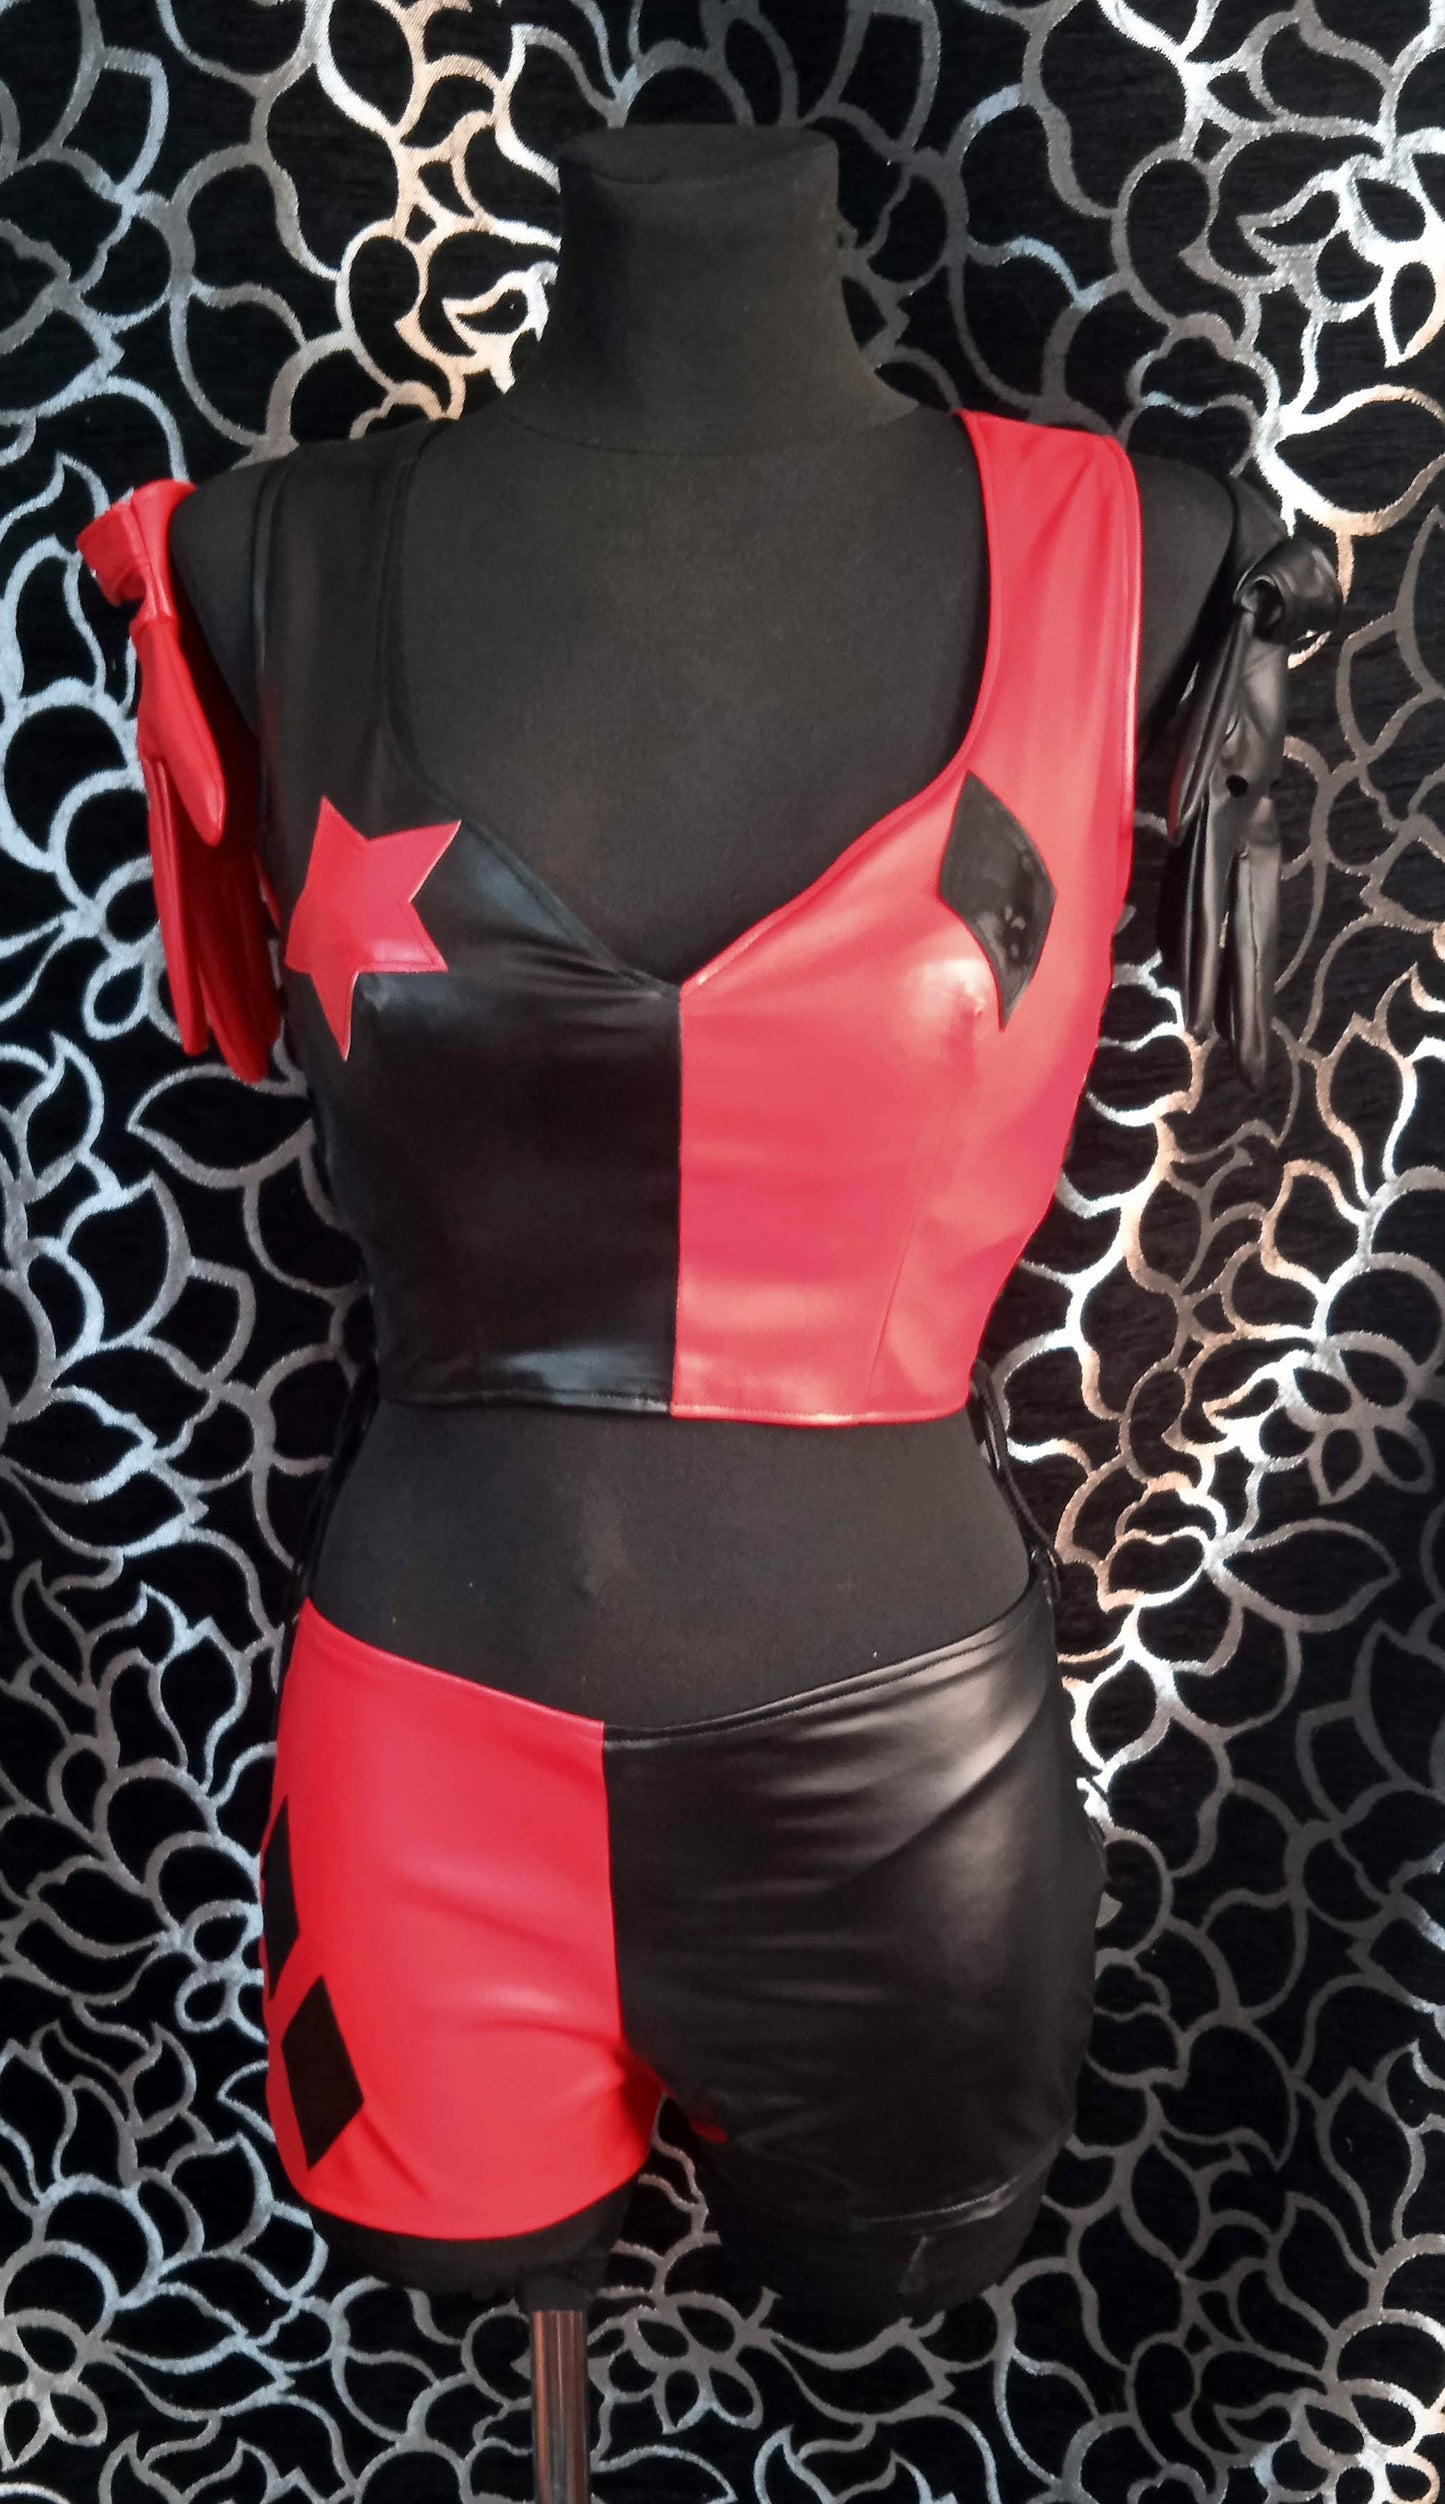 Harley Quinn Hand made leather outfit / comix outfit / super villain / Joker girlfriend cosplay